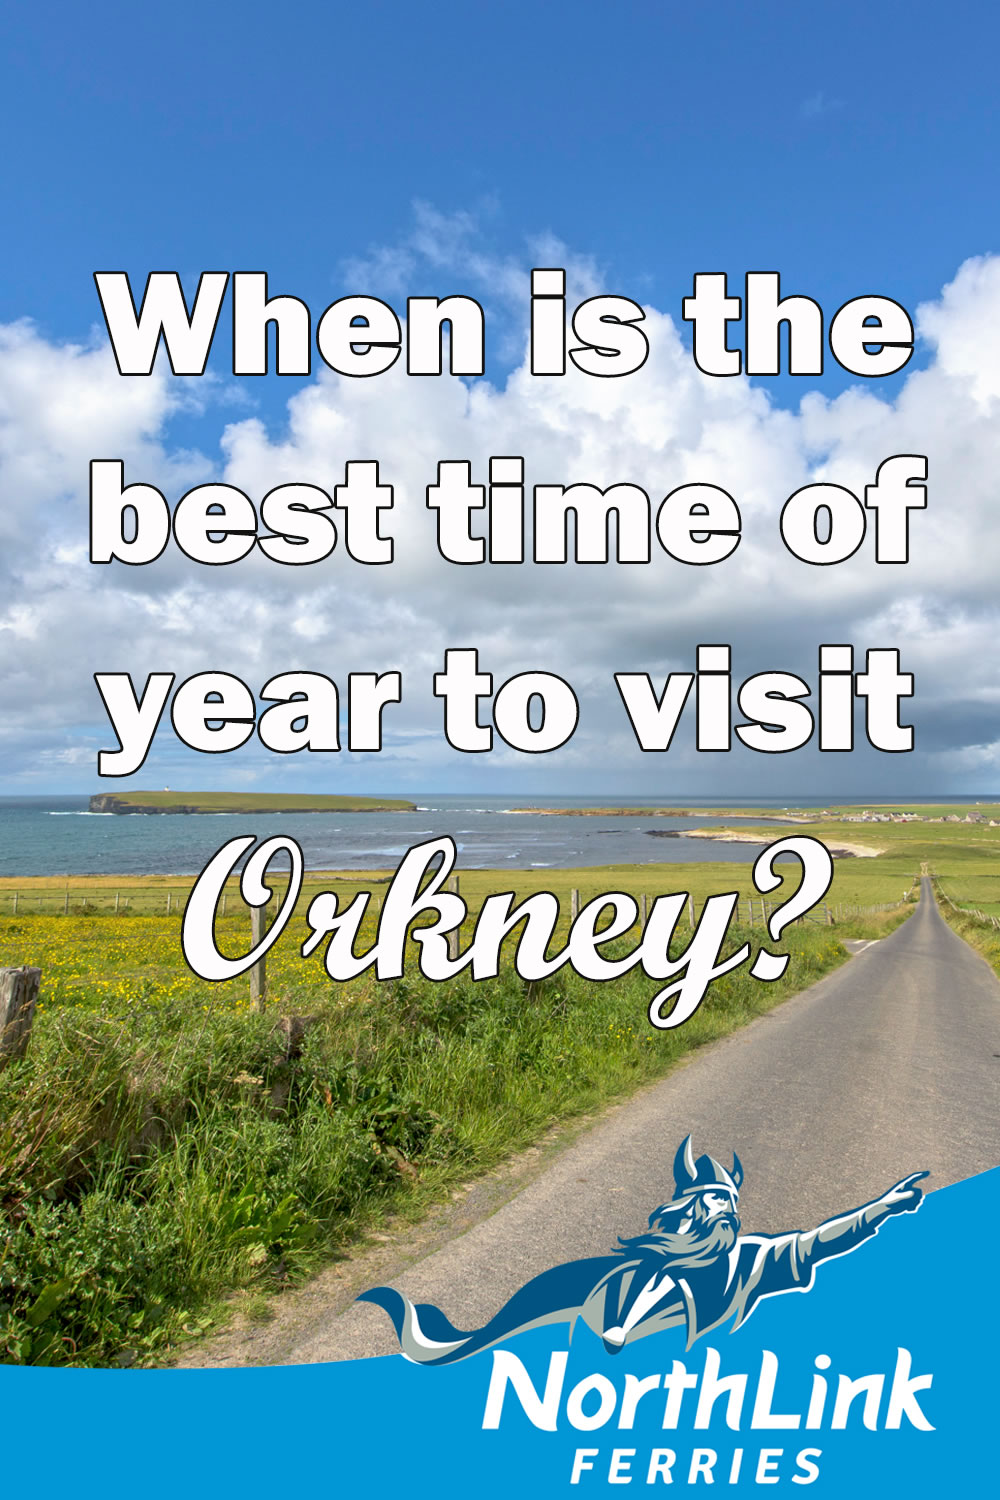 When is the best time of year to visit Orkney?